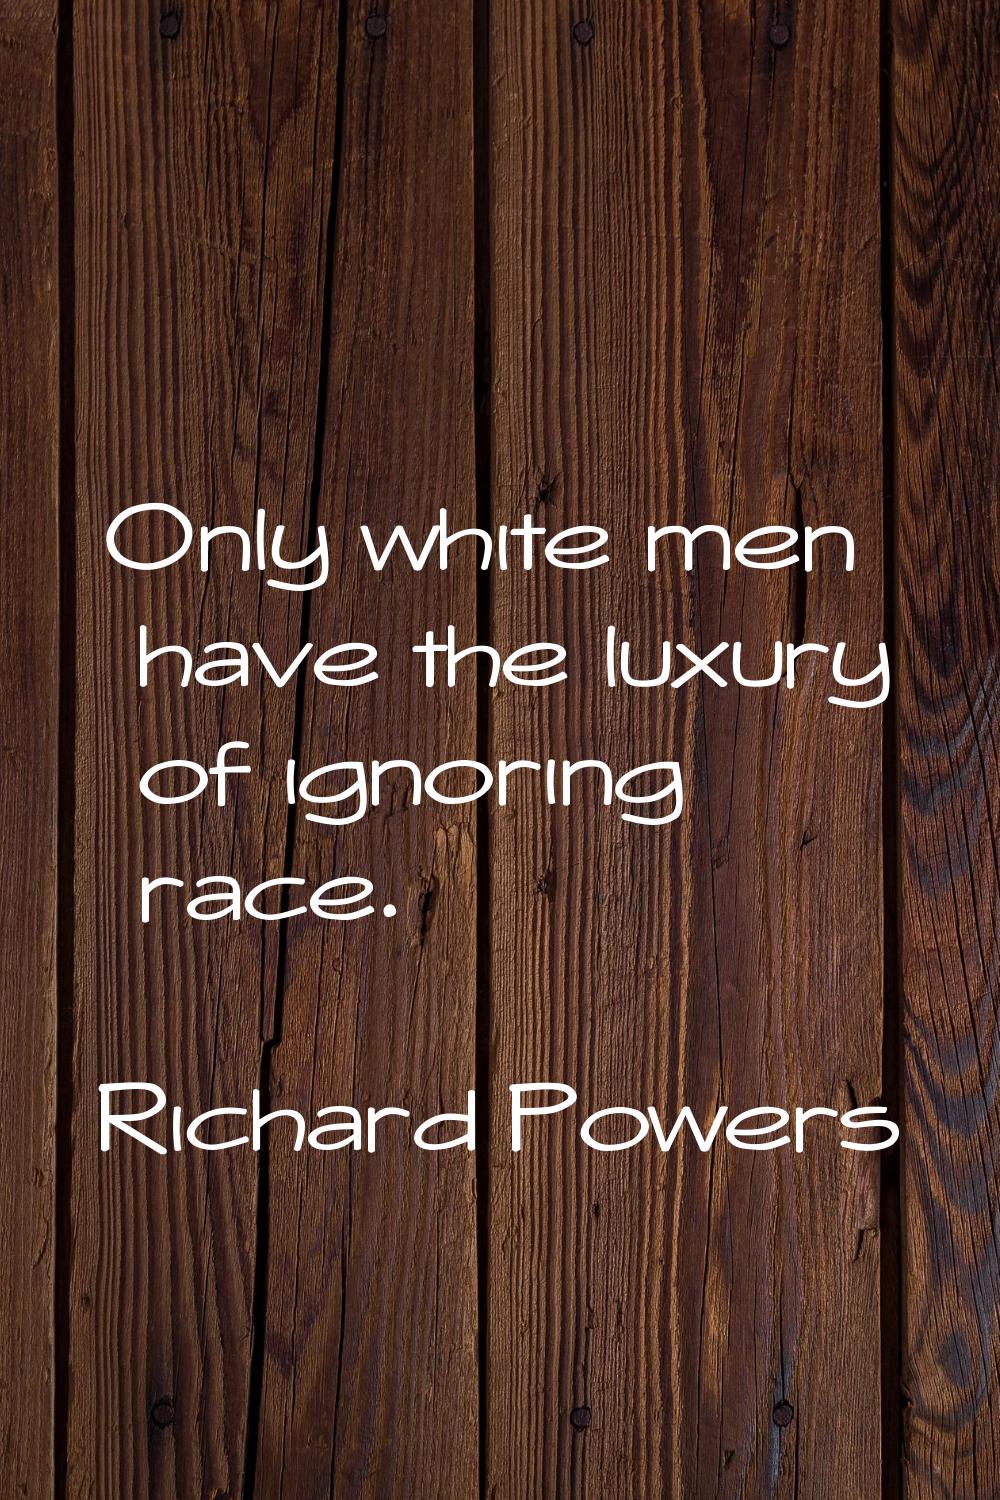 Only white men have the luxury of ignoring race.